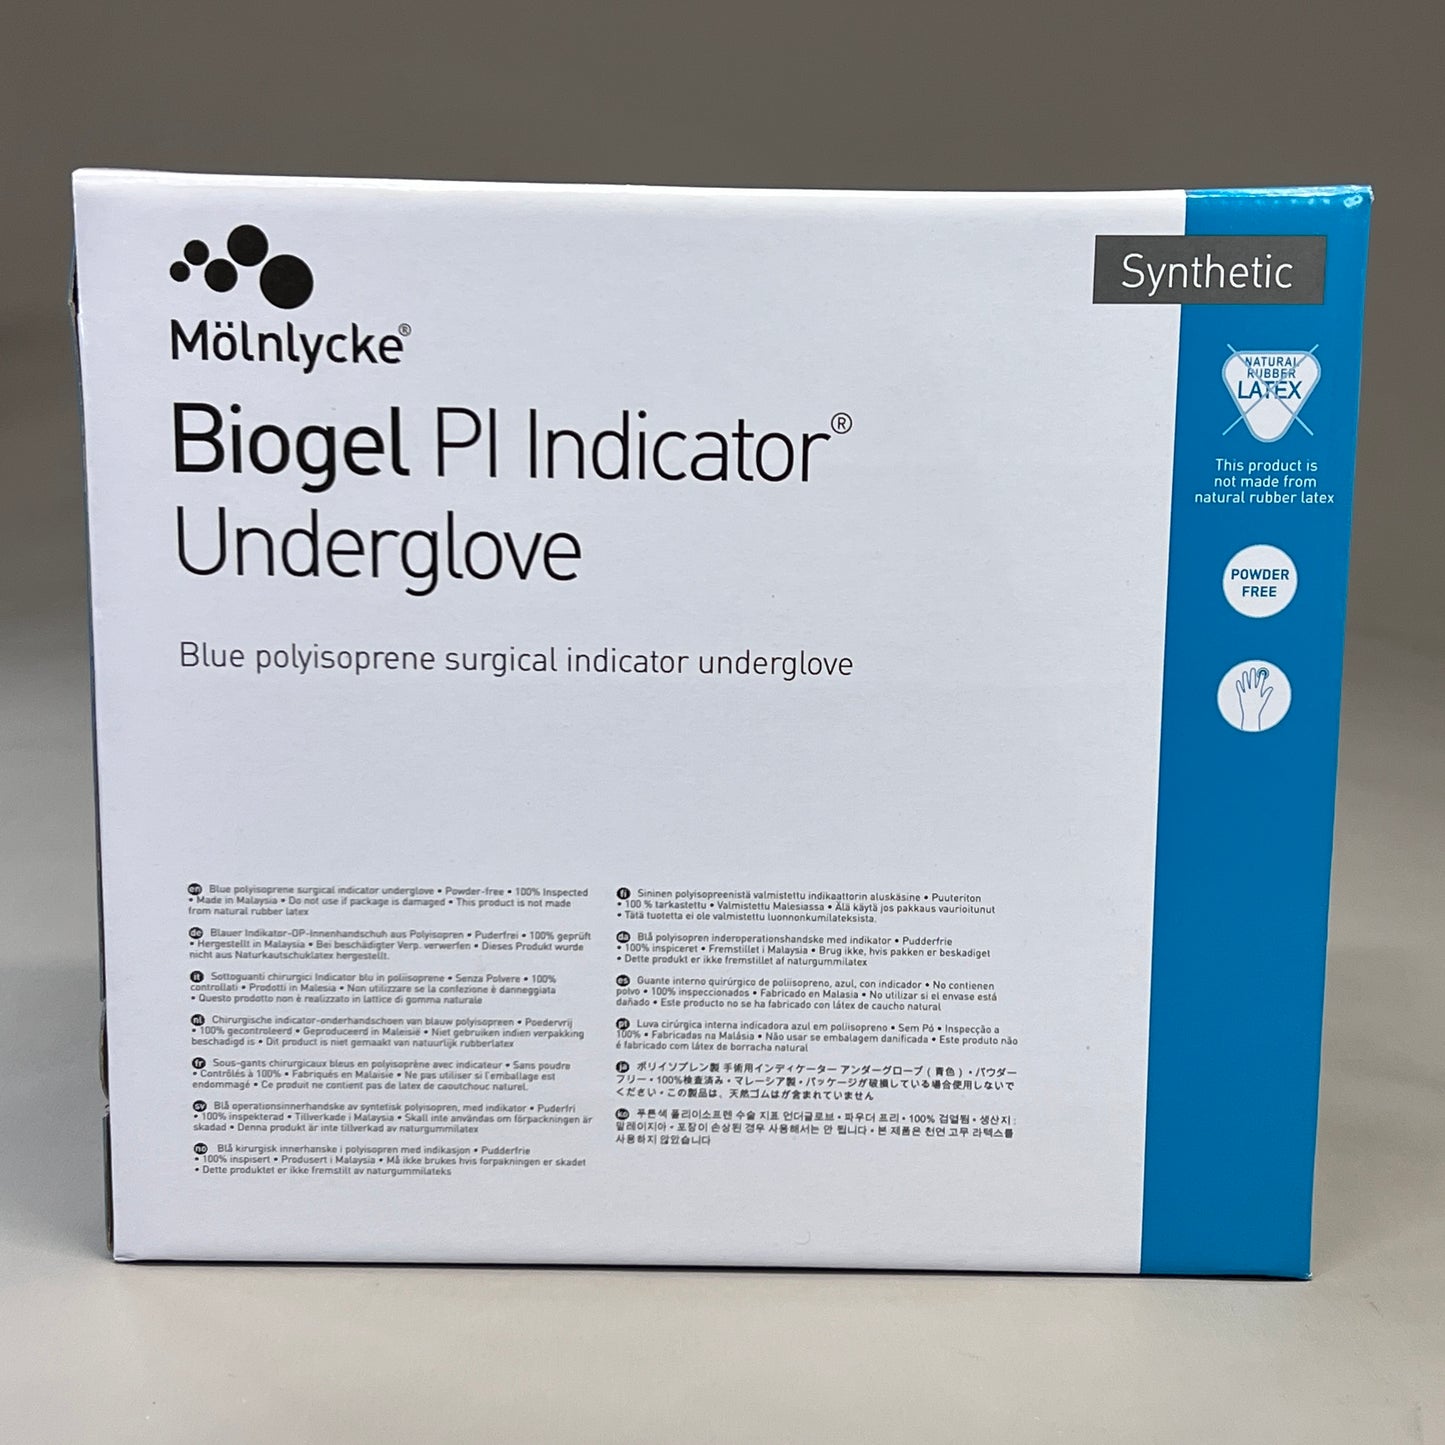 MOLNLYCKE Biogel Pl Indicator Synthetic Underglove SZ 7.5 Blue 50 Pairs 41675 (New)